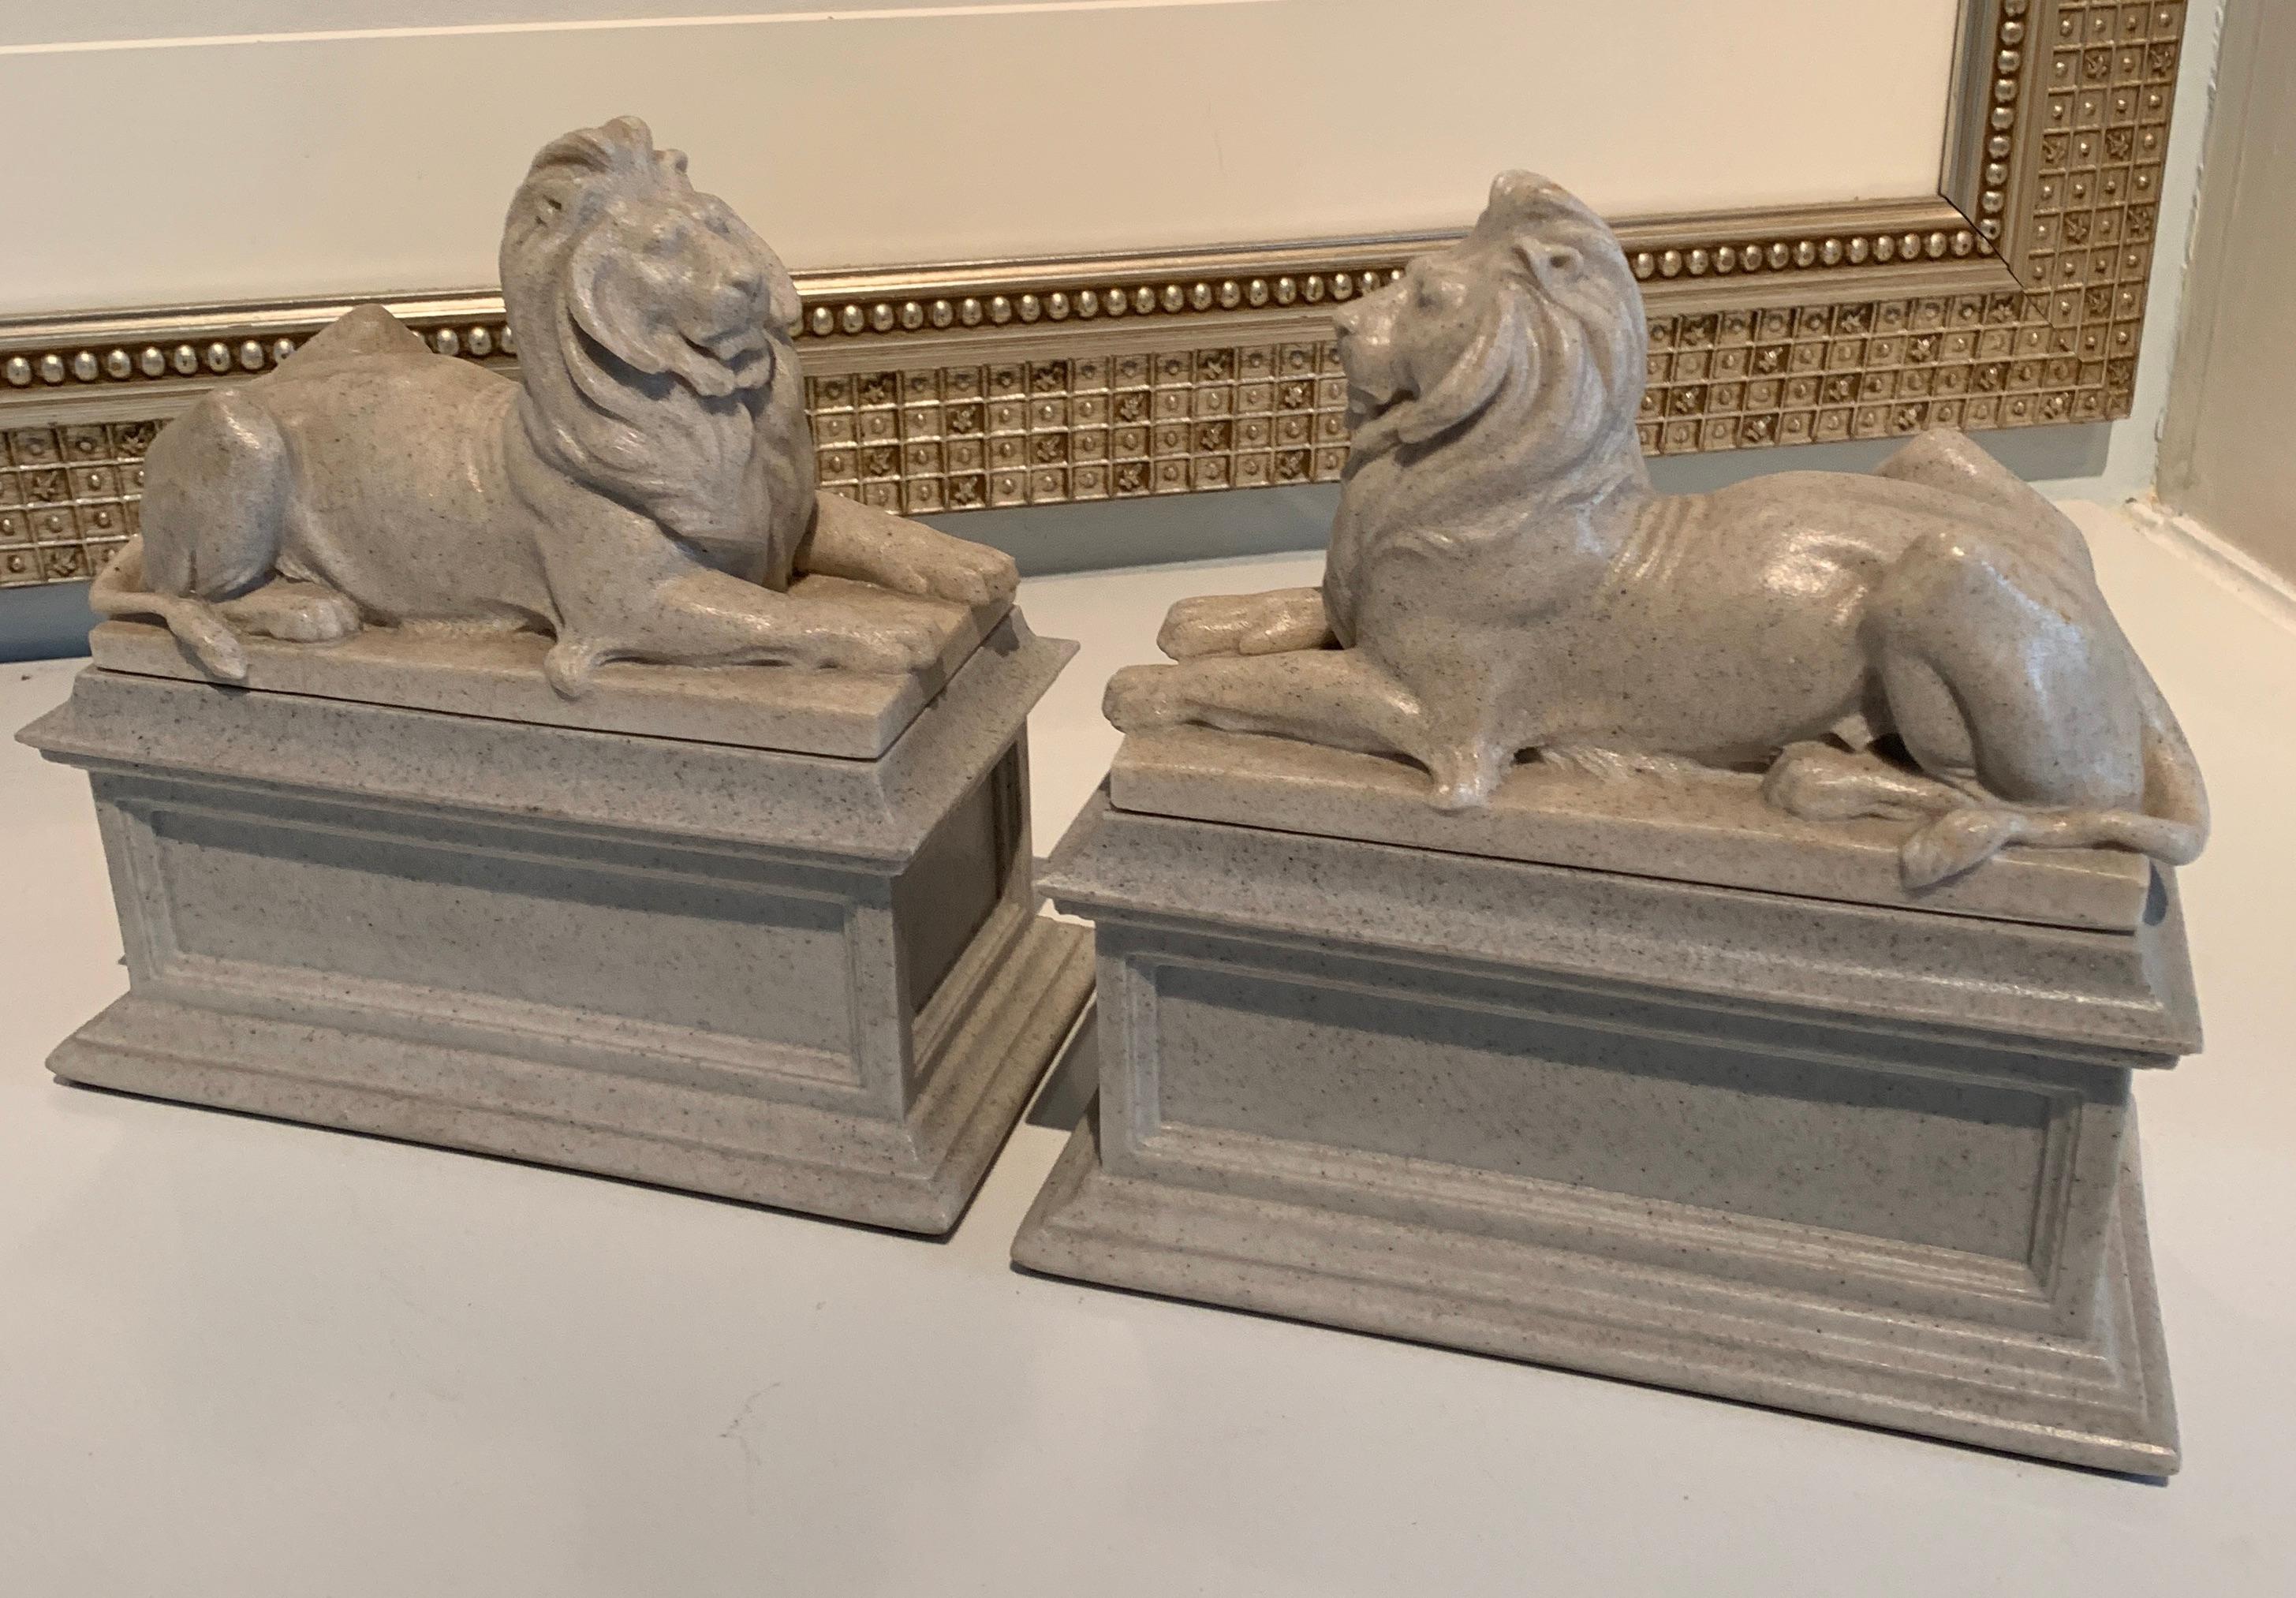 A pair of reclining lion bookends, a stunning pair with the look of limestone, but a composition material. The pair are of good weight for those larger books... looking great on any shelf or desk.